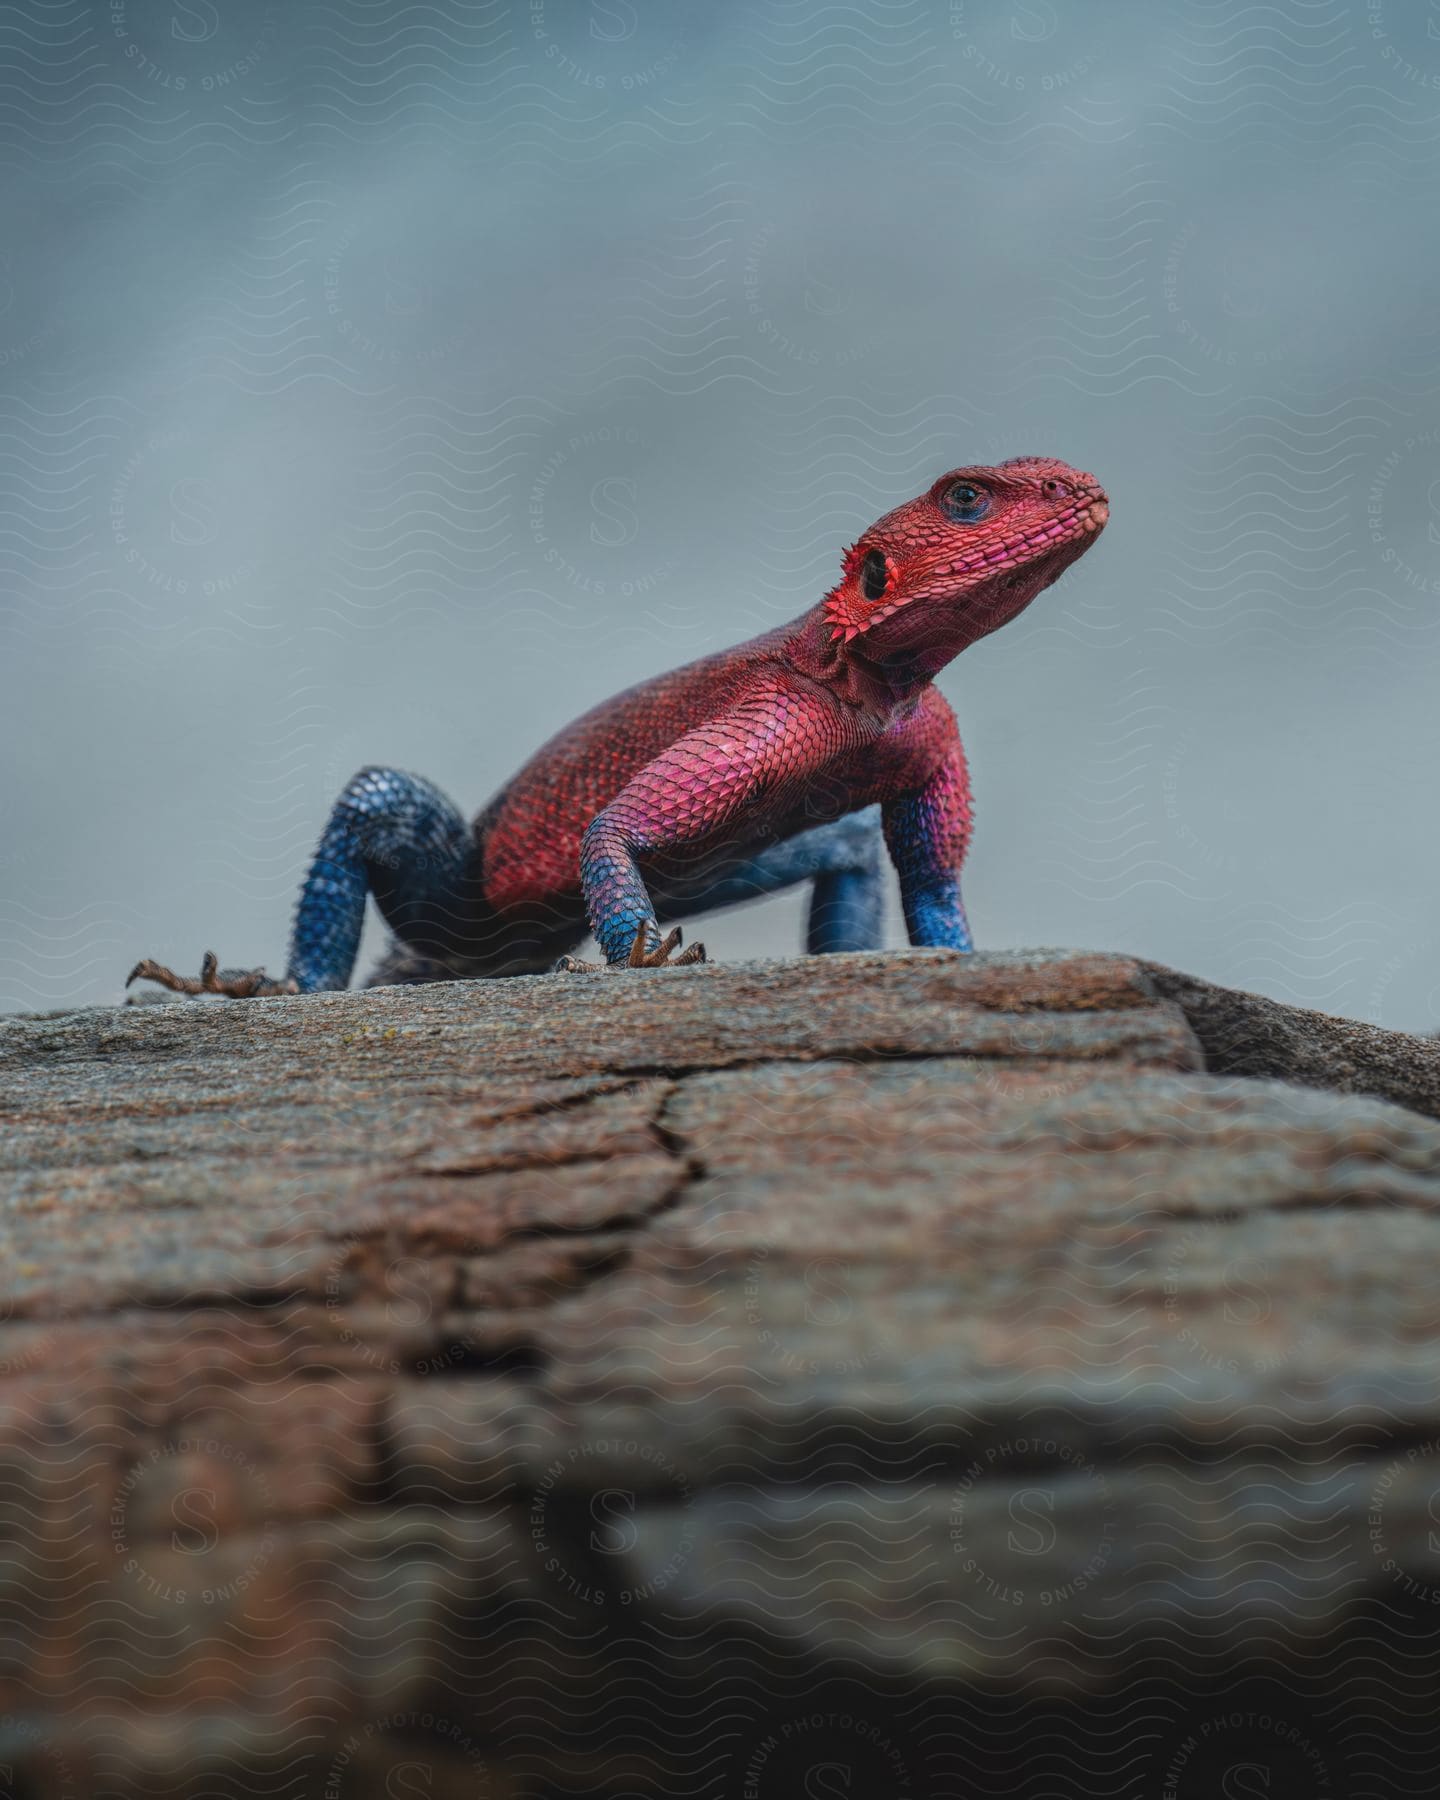 A red lizard with blue legs stands on a rocky surface